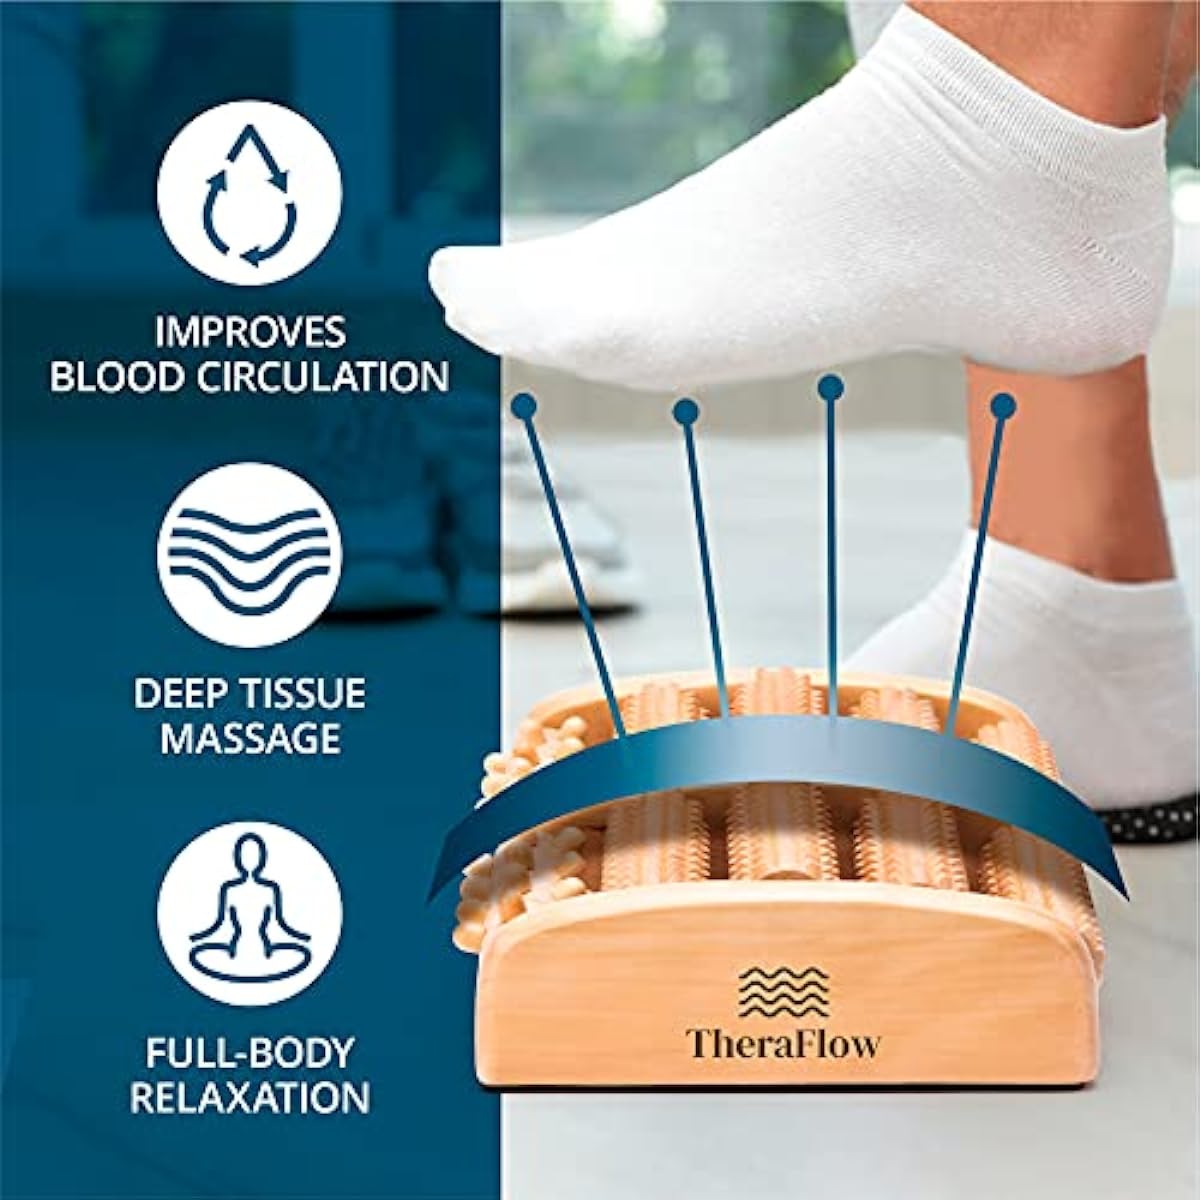 TheraFlow Foot Massager Roller - Plantar Fasciitis Relief, Heel, Arch, Muscle Aches, Foot Pain, Stress Relief - Relaxation Gifts for Women, Men - Shiatsu Massage, Reflexology Tool - Dual Wooden (Large)